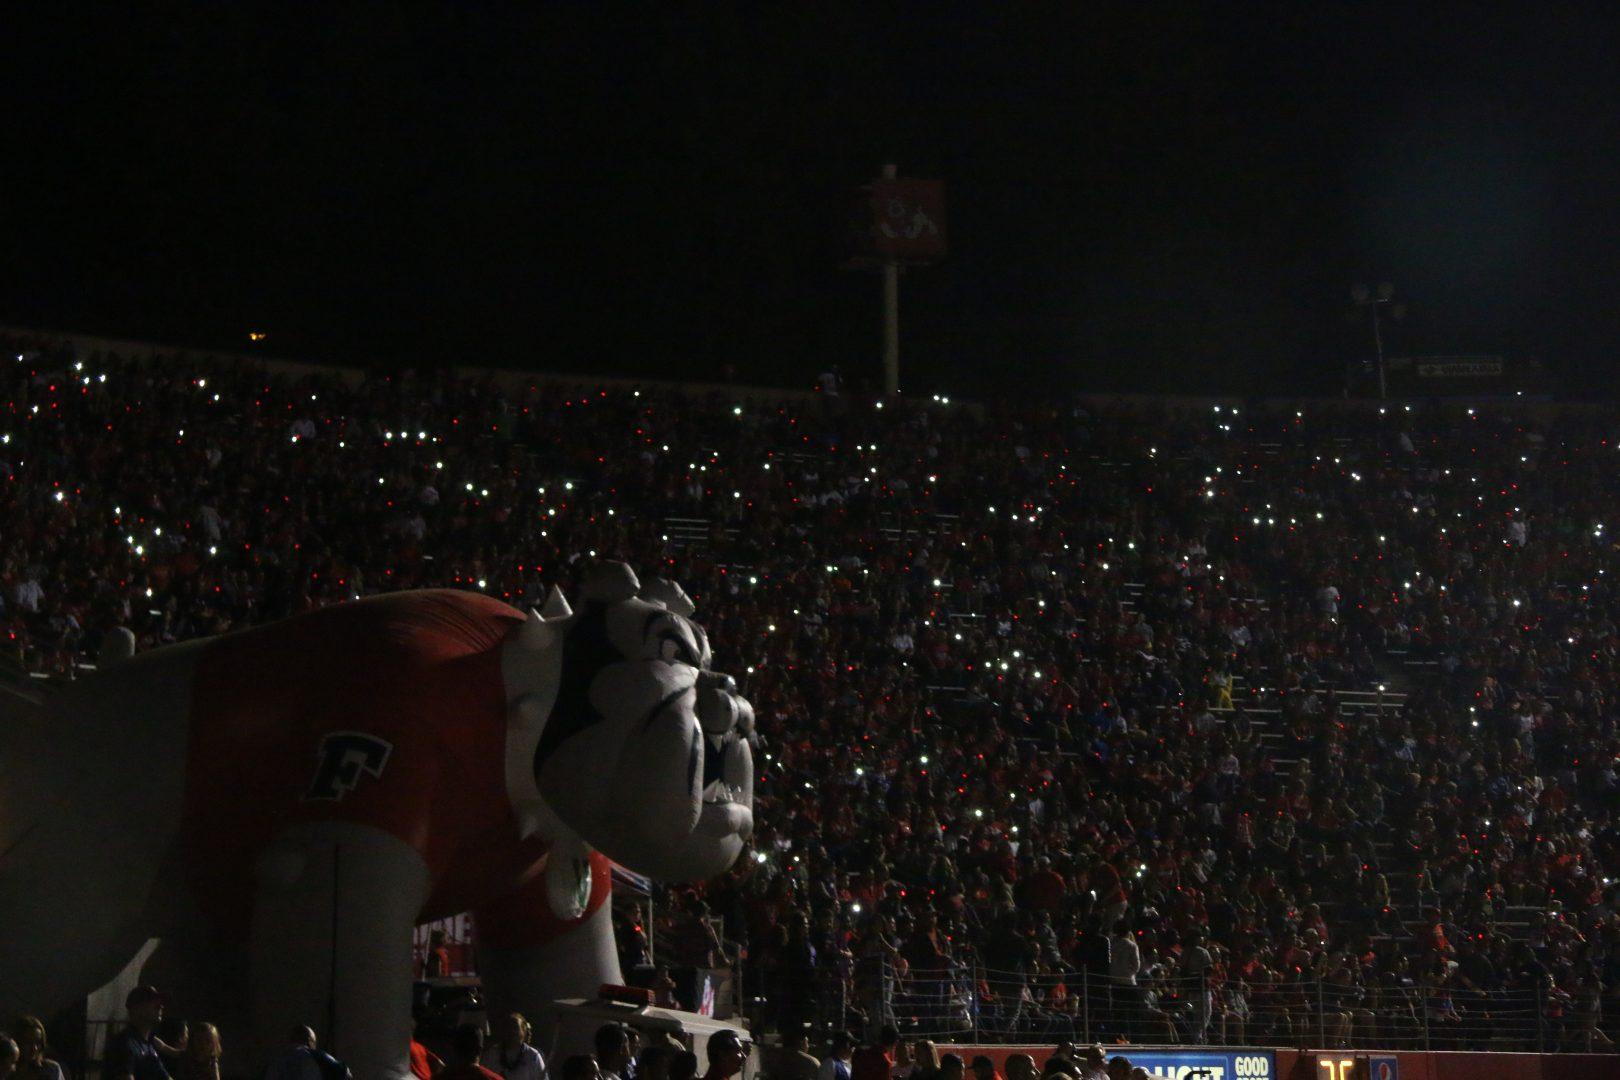 Tripped circuit breaker cause of light outage at Bulldog Stadium